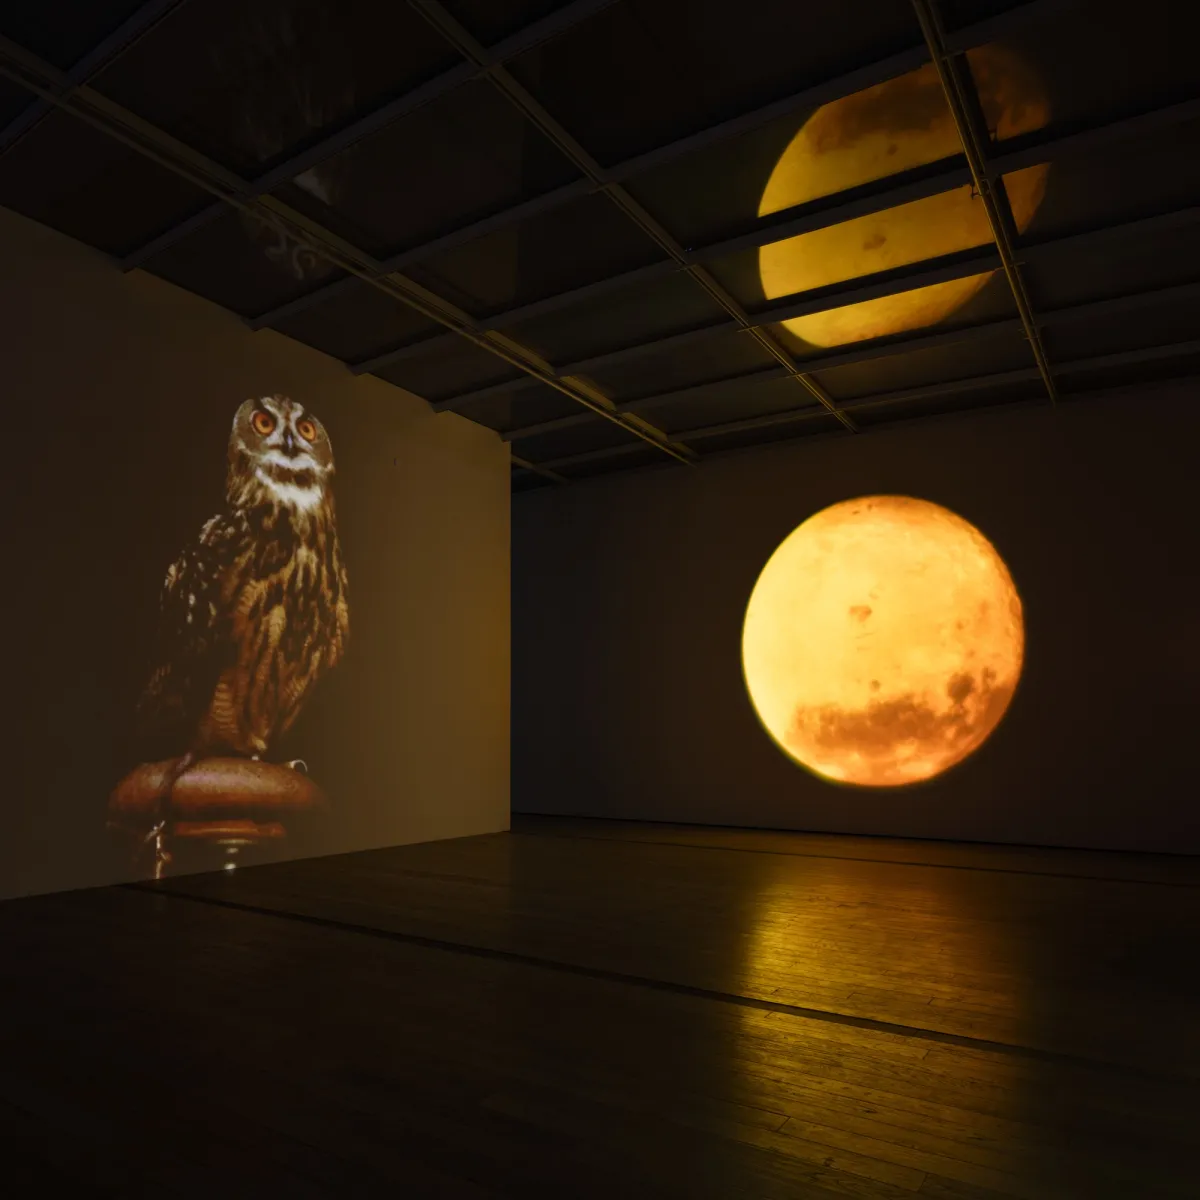 A projection of the moon illuminating upfront on a gallery wall, casting reflective hued light onto the floor and ceiling. On a sidewall, a separate projection showcases an owl. Part of the Diana Thater: The Sympathetic Imagination exhibition at the Los Angeles County Museum of Art.